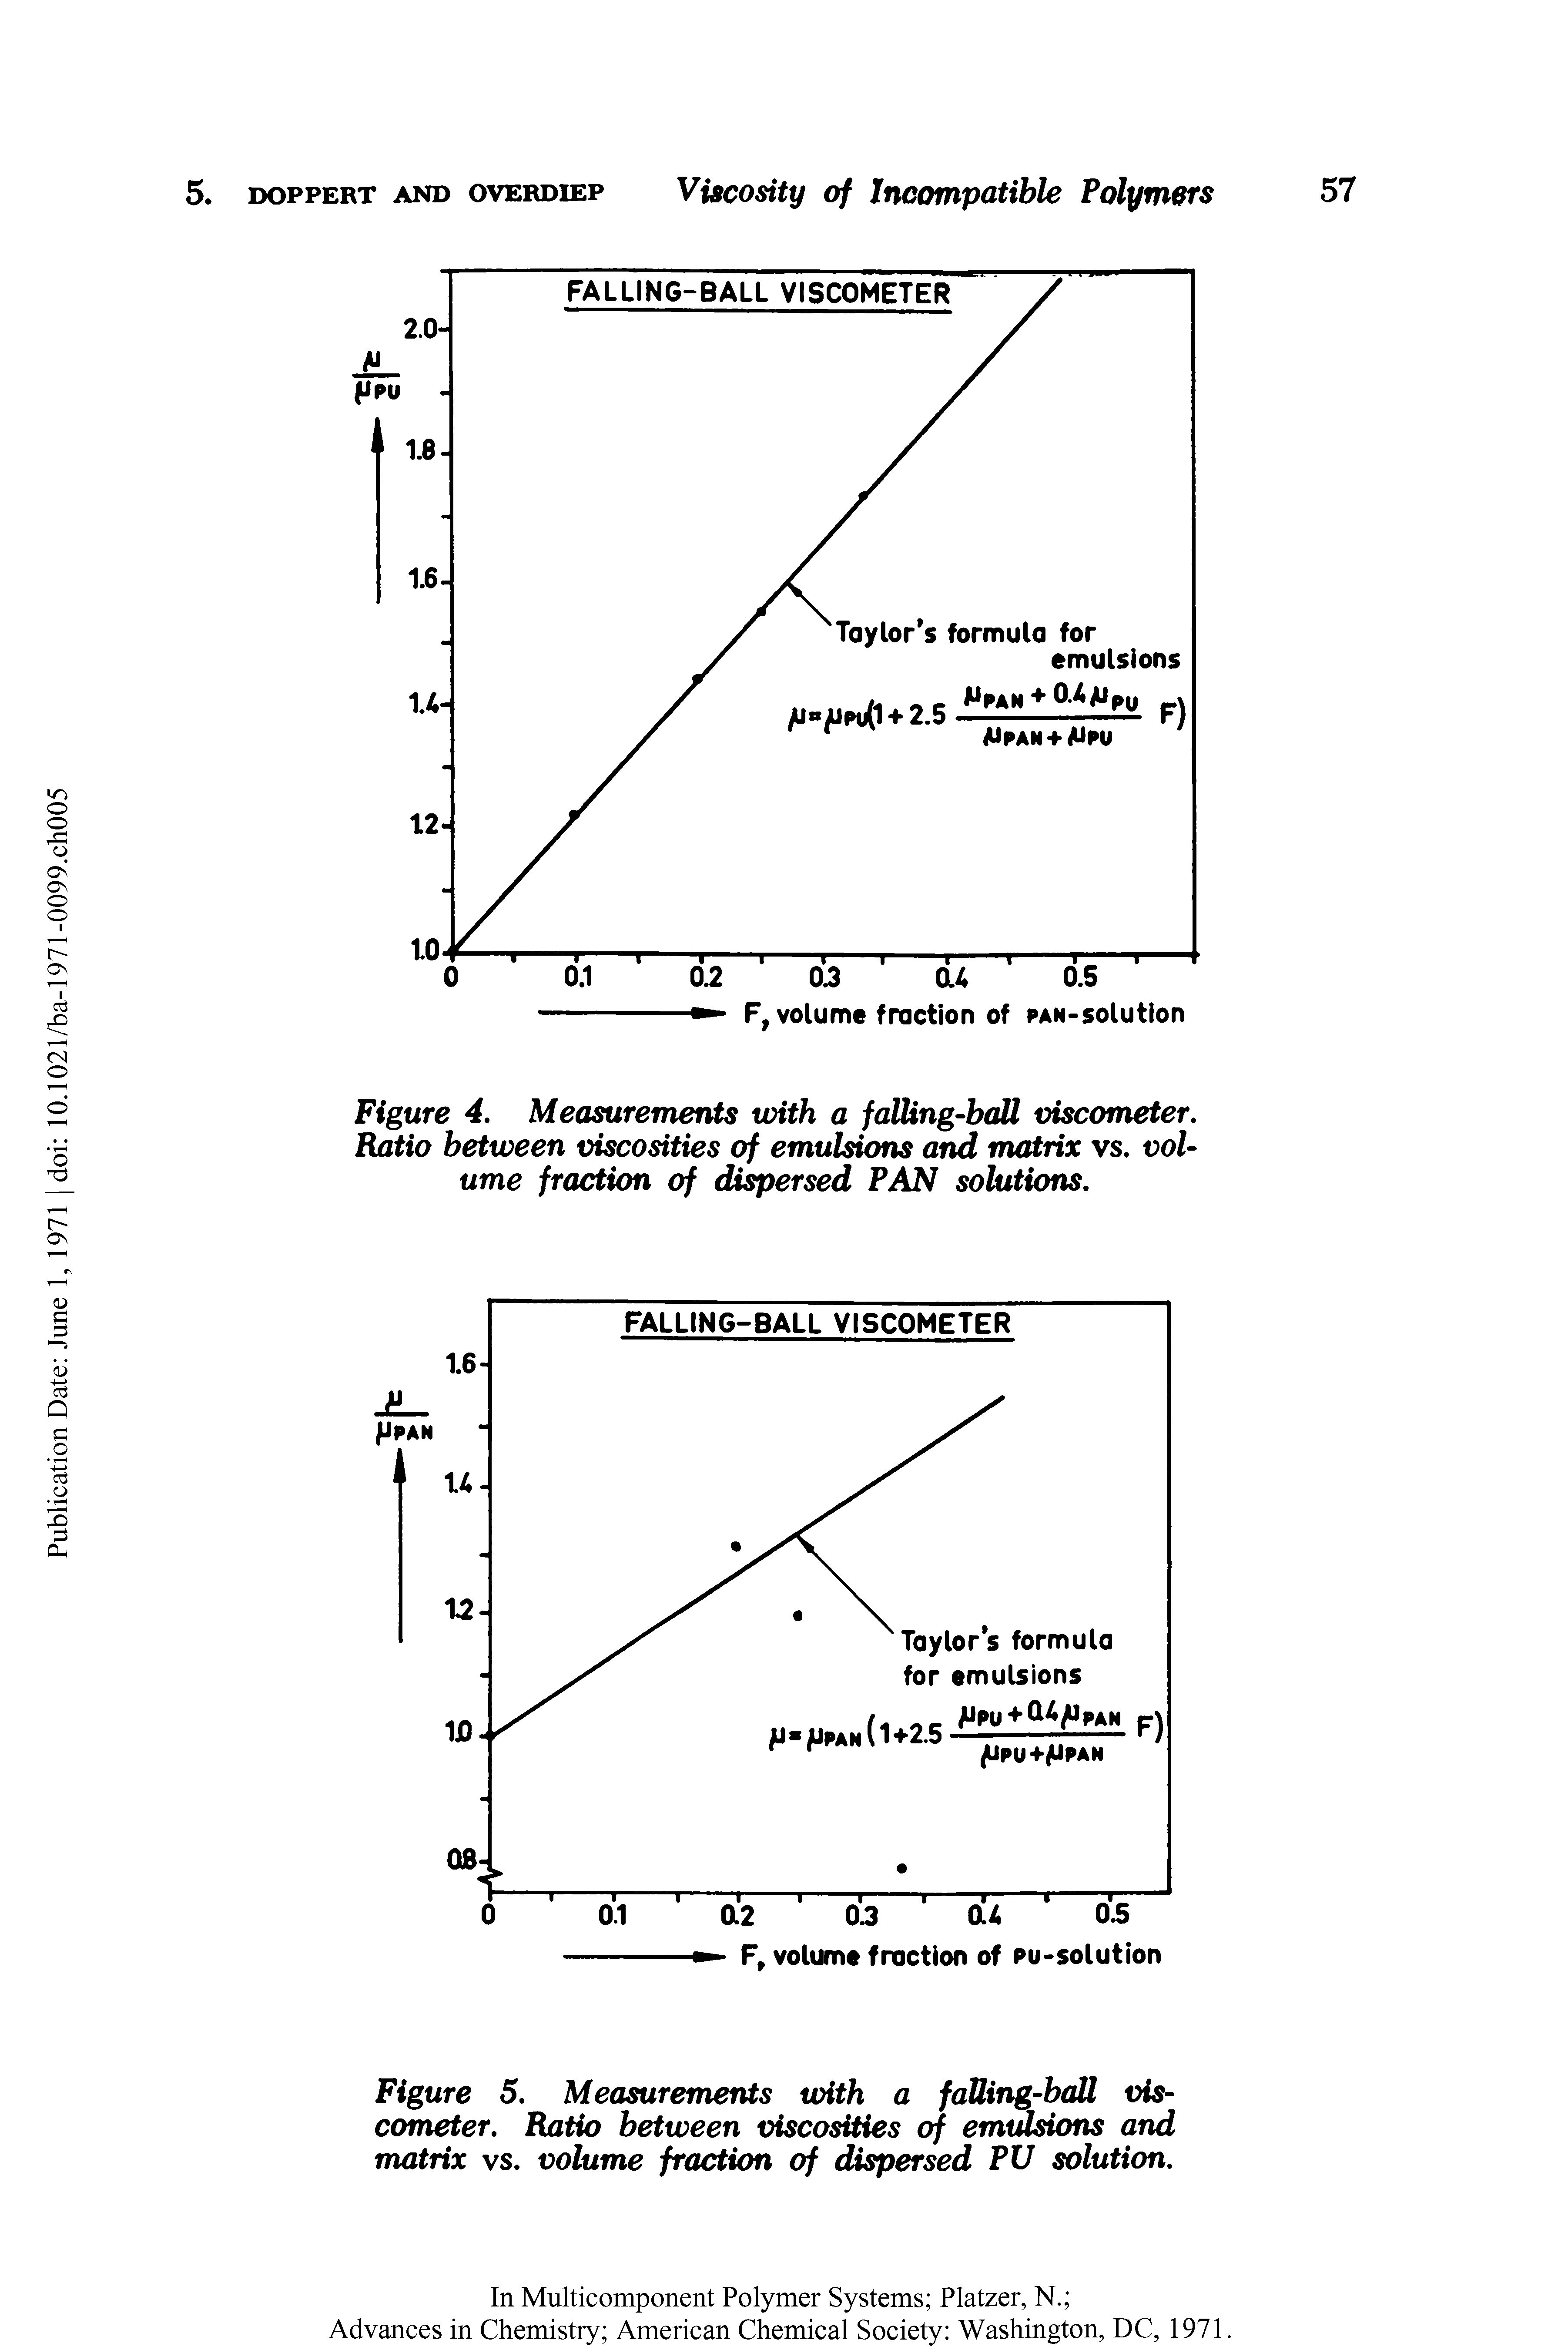 Figure 4. Measurements with a falling-ball viscometer. Ratio between viscosities of emulsions and matrix vs. volume fraction of dispersed PAN solutions.